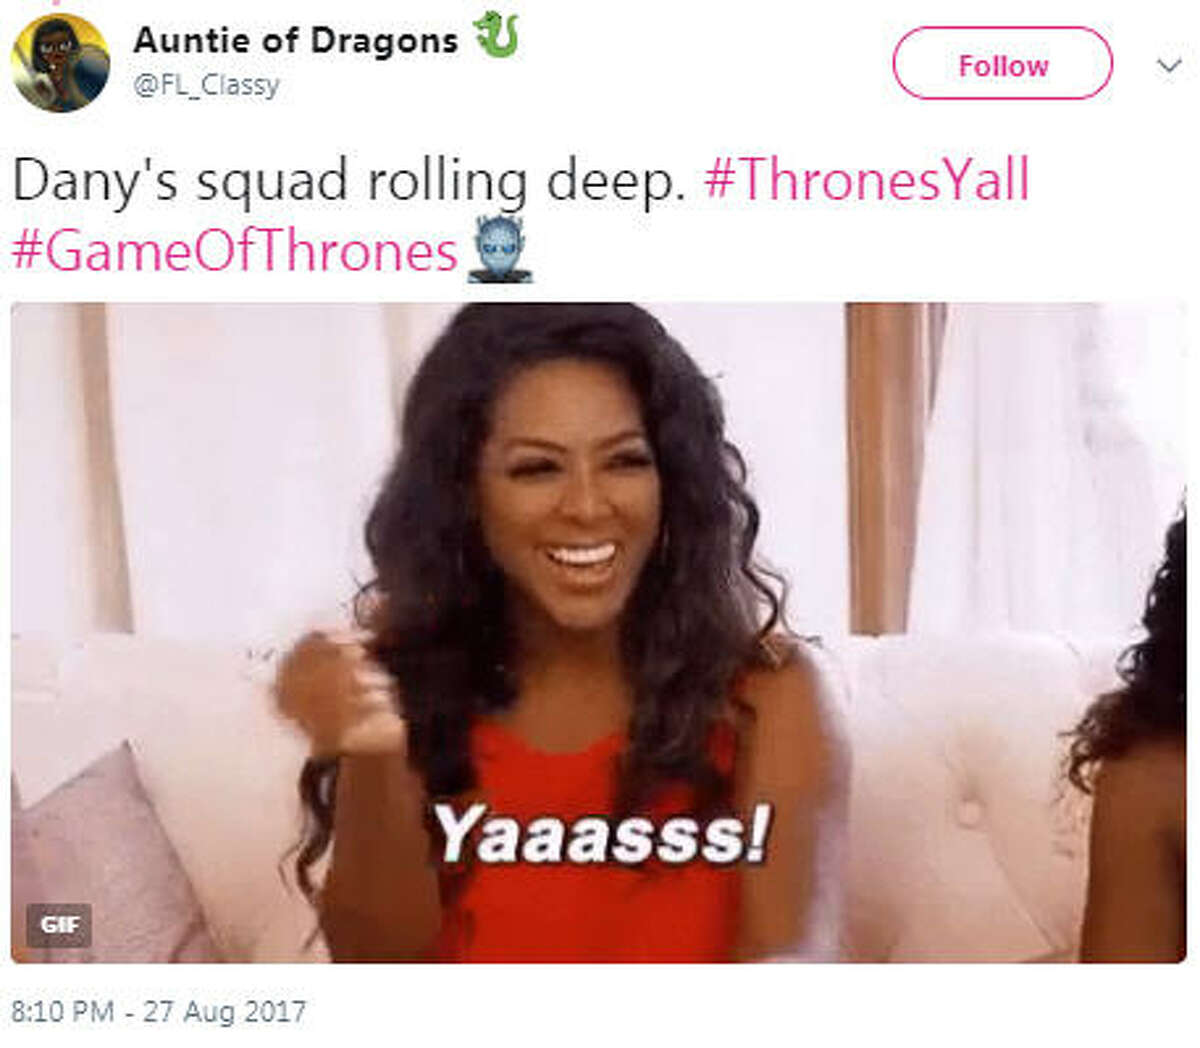 "Dany's squad rolling deep. #ThronesYall #GameOfThrones" Source: Twitter